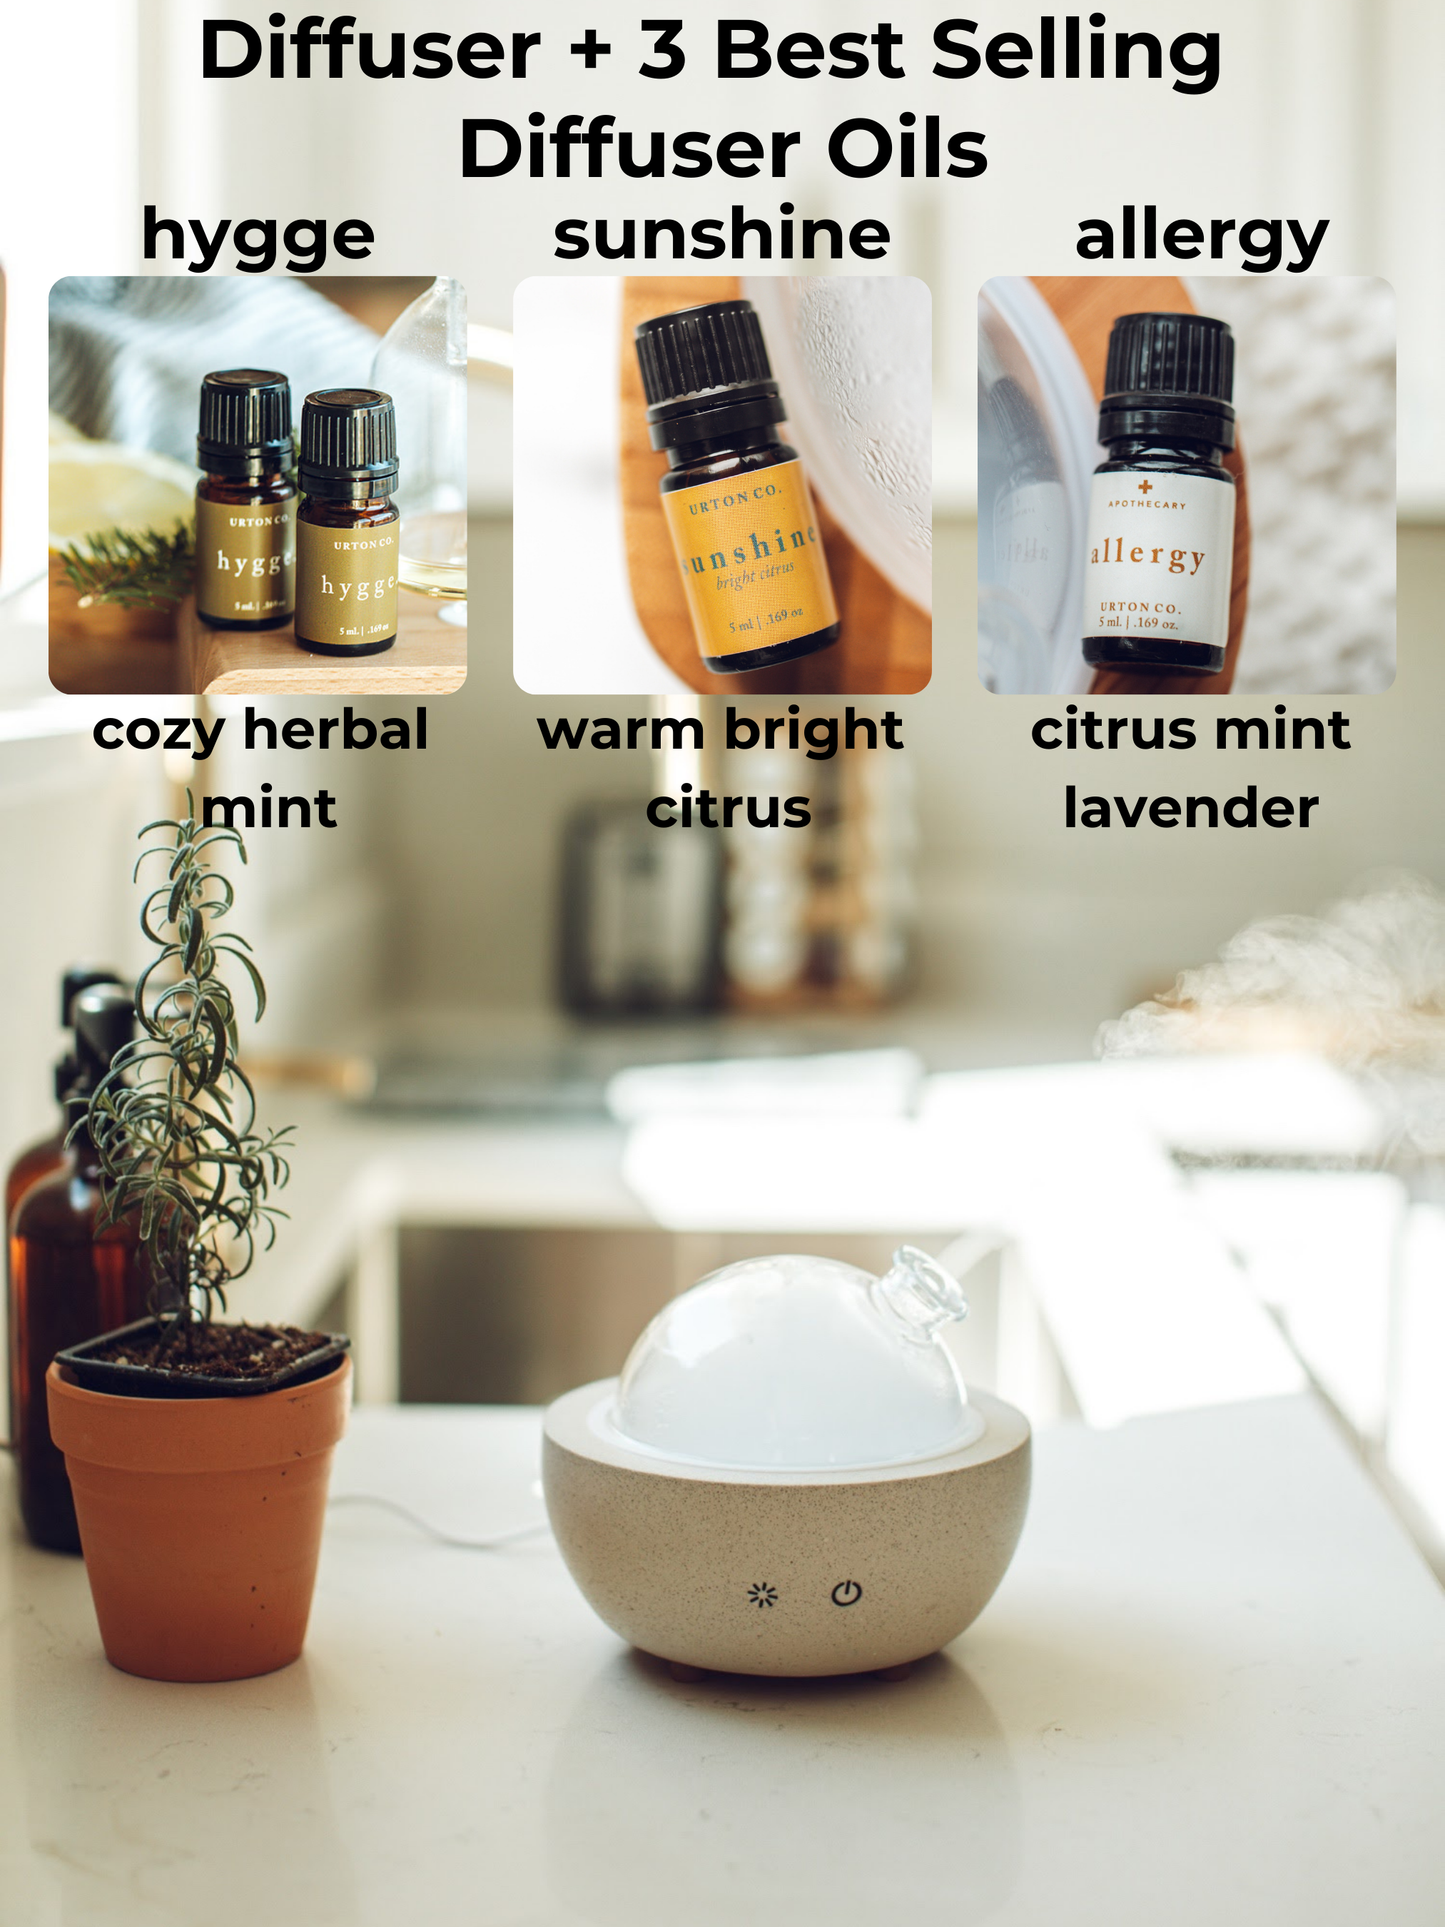 Concrete Essential Oil Diffuser. Aroma Diffuser. Diffuser for Essential Oils. Young Living Ariaupe. Aromatherapy Diffuser.